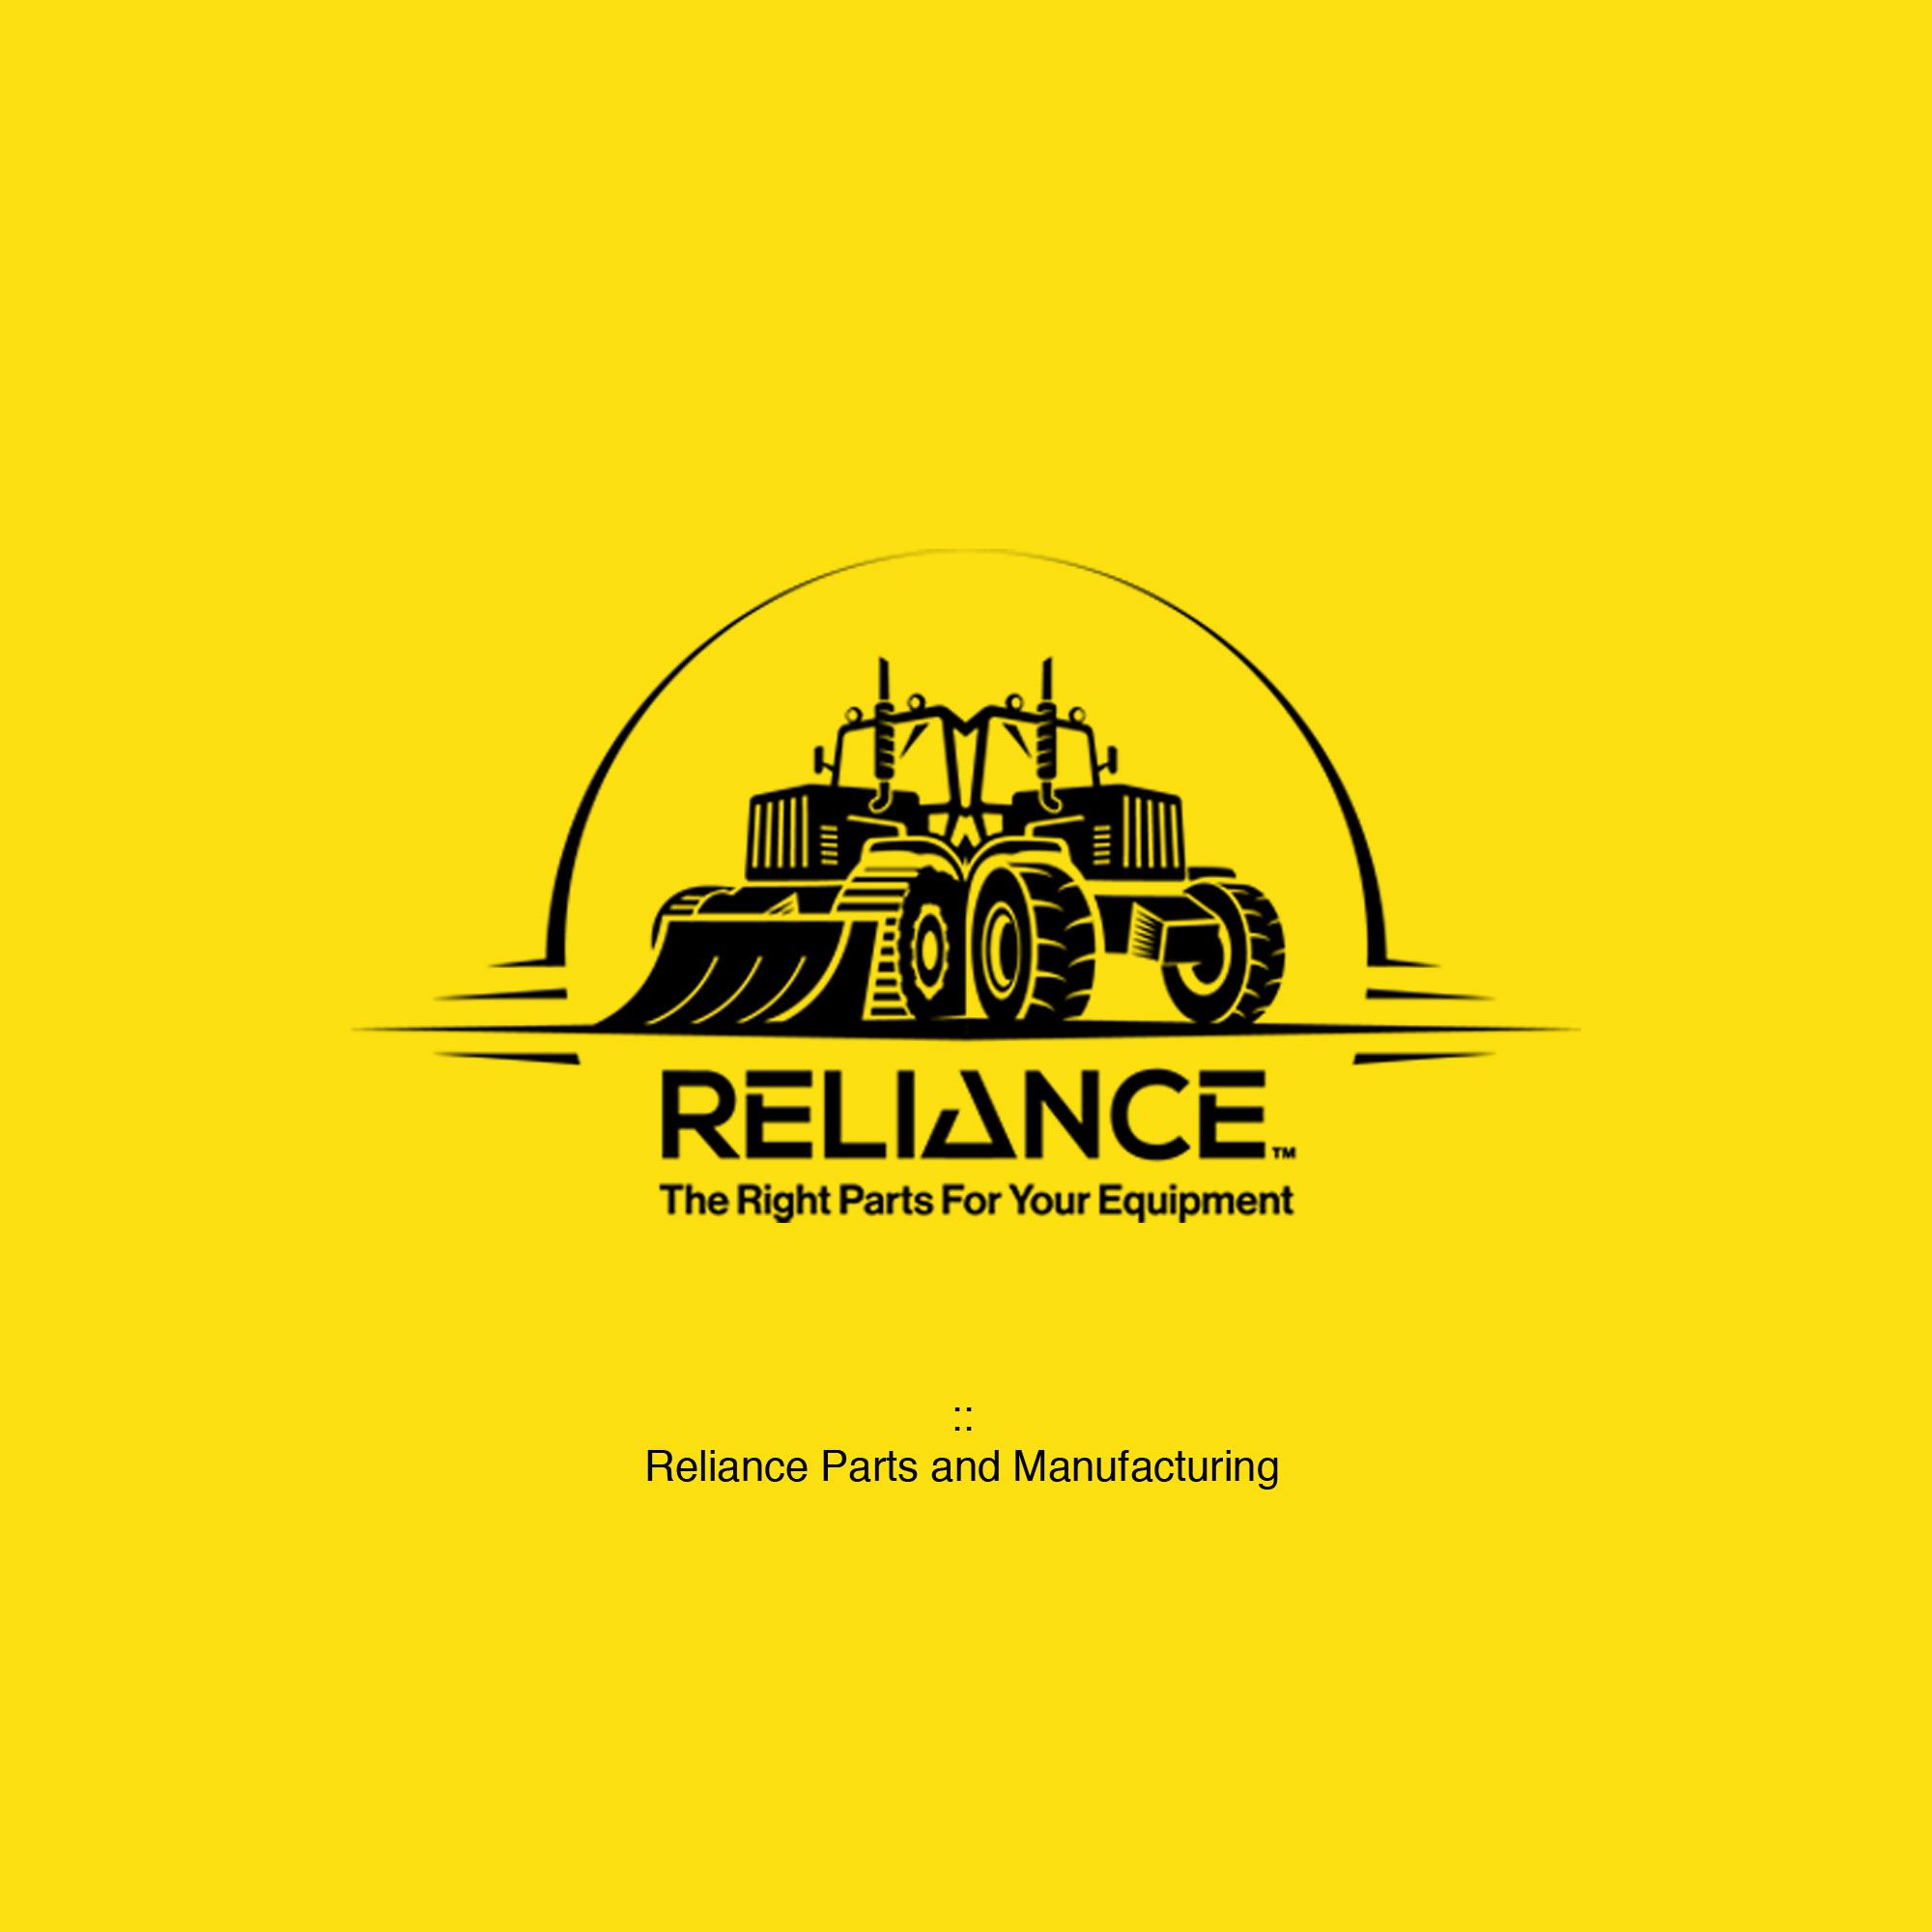 Reliance Parts and Manufacturing